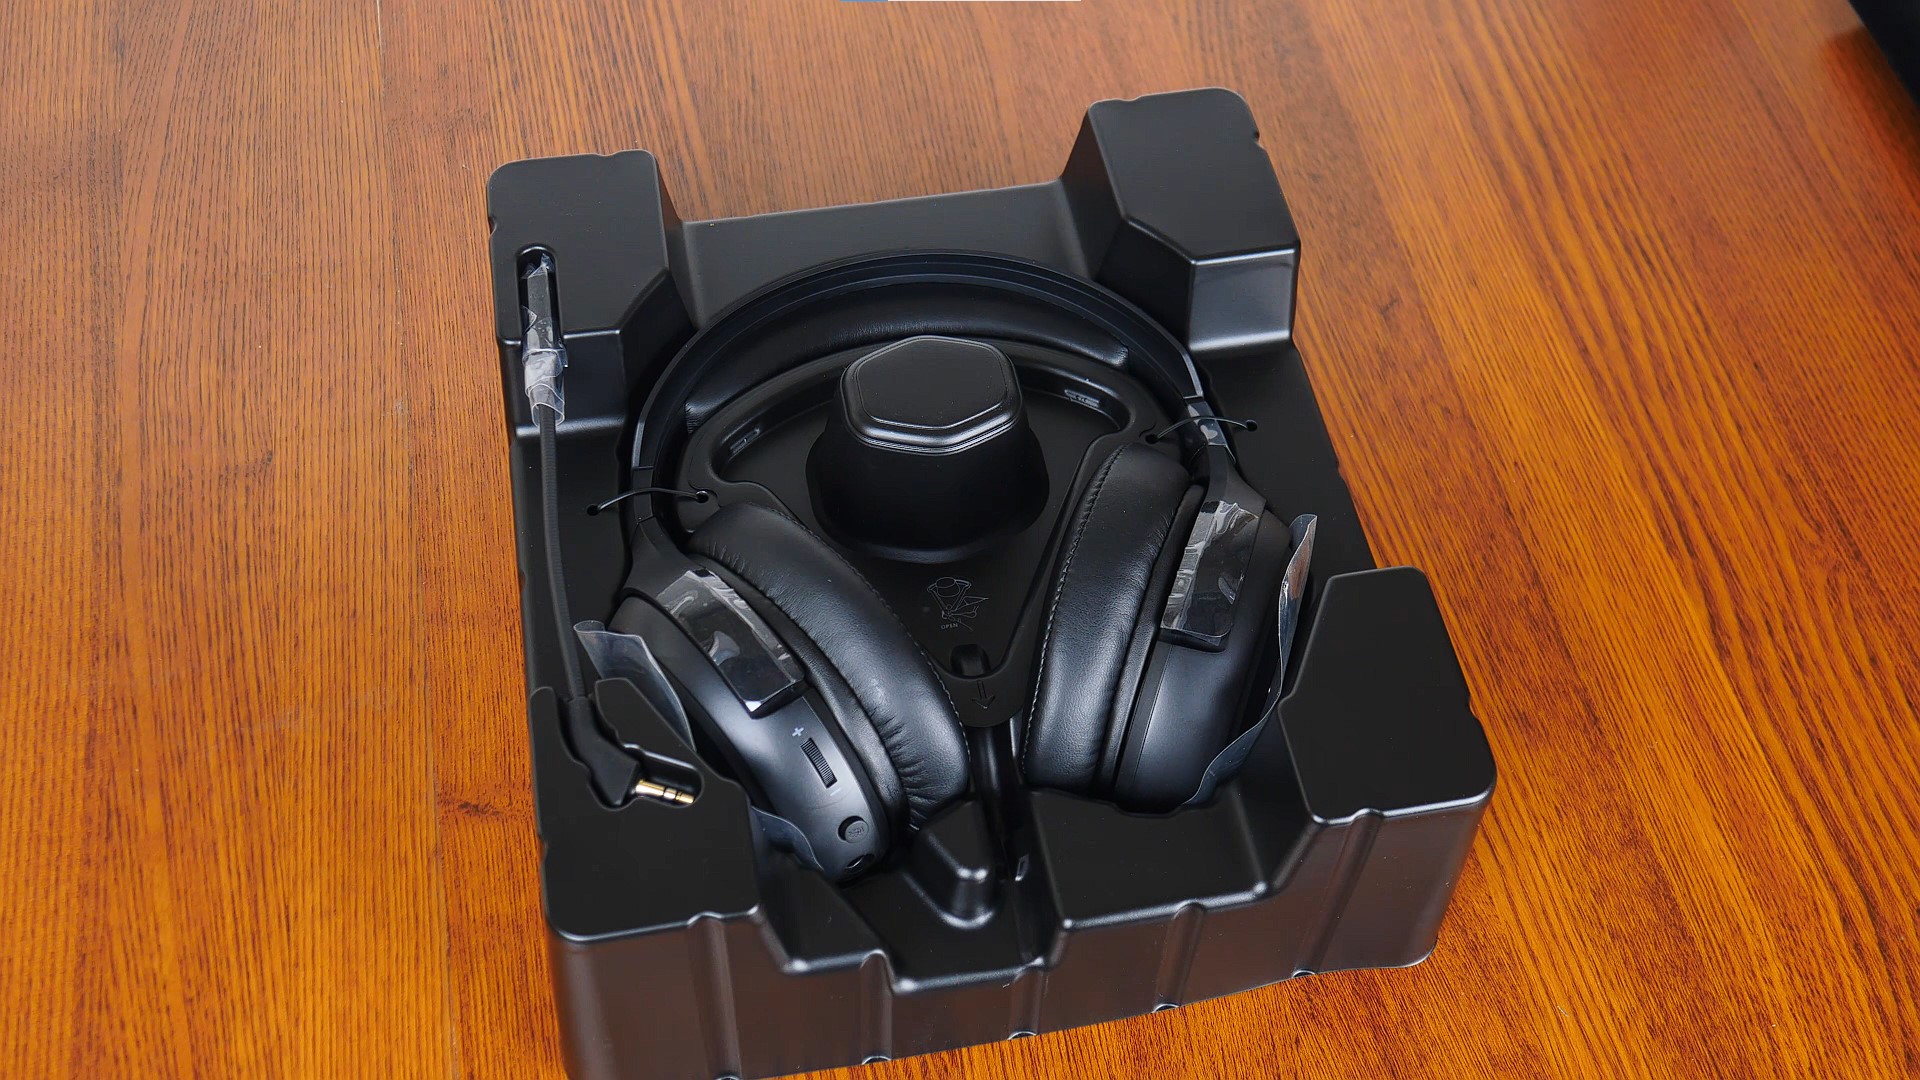 Cooler Master MH670 Wireless Gaming Headset Accessories